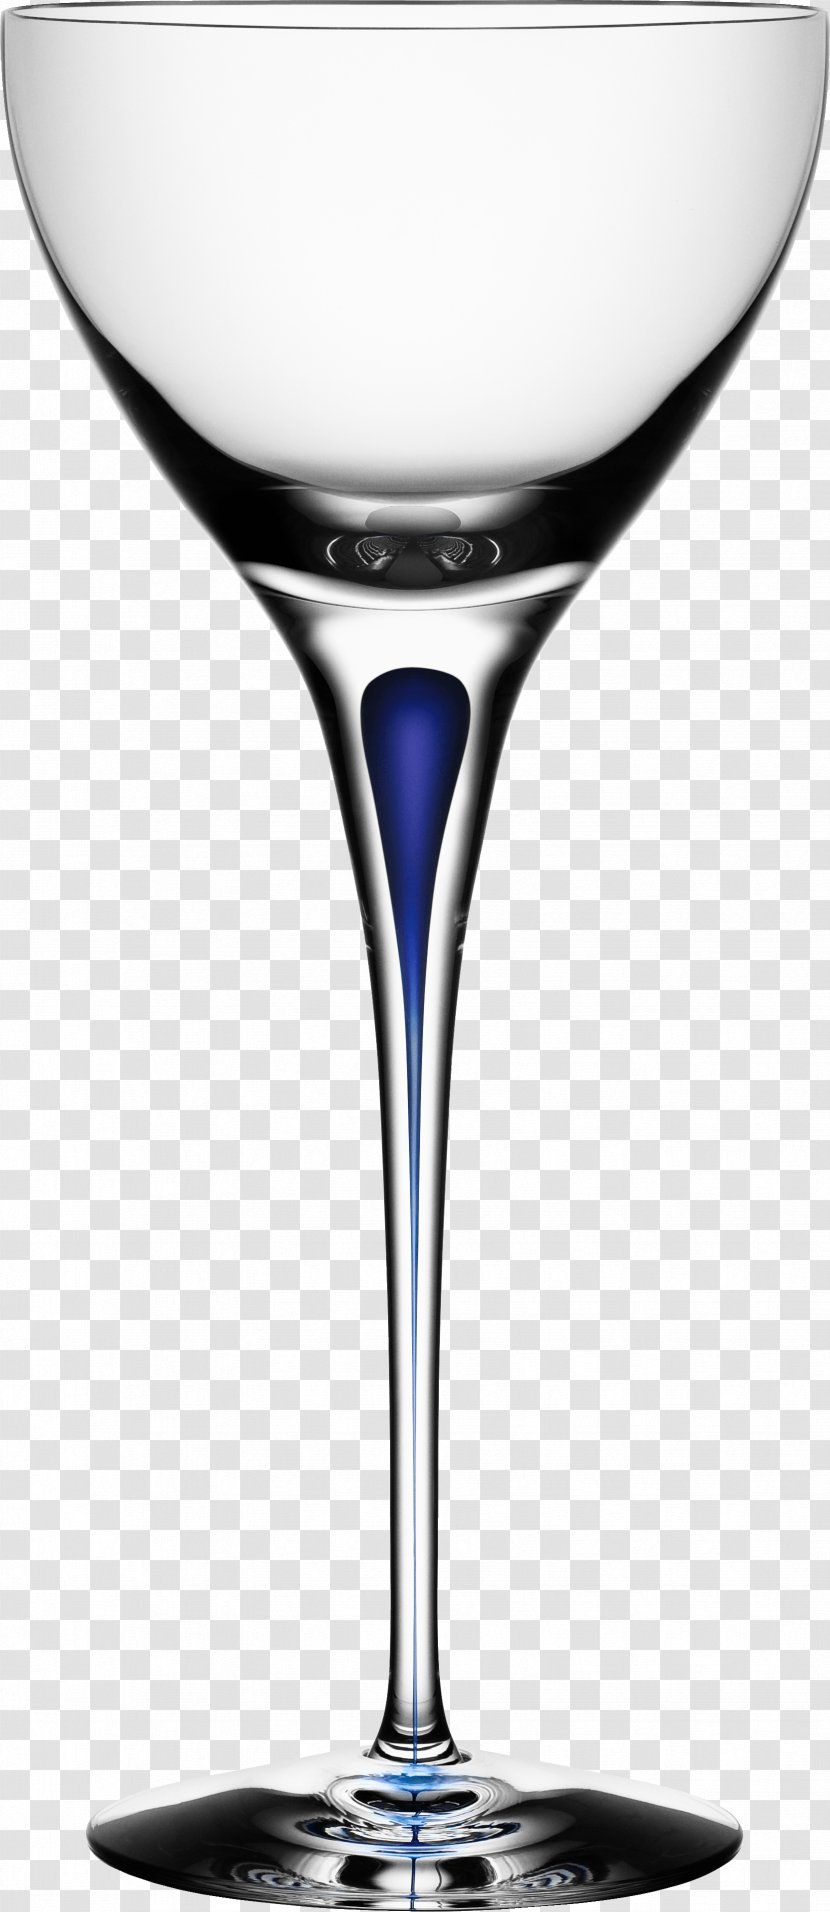 Cocktail Wine Glass Martini Champagne - Drinkware - Image Transparent PNG